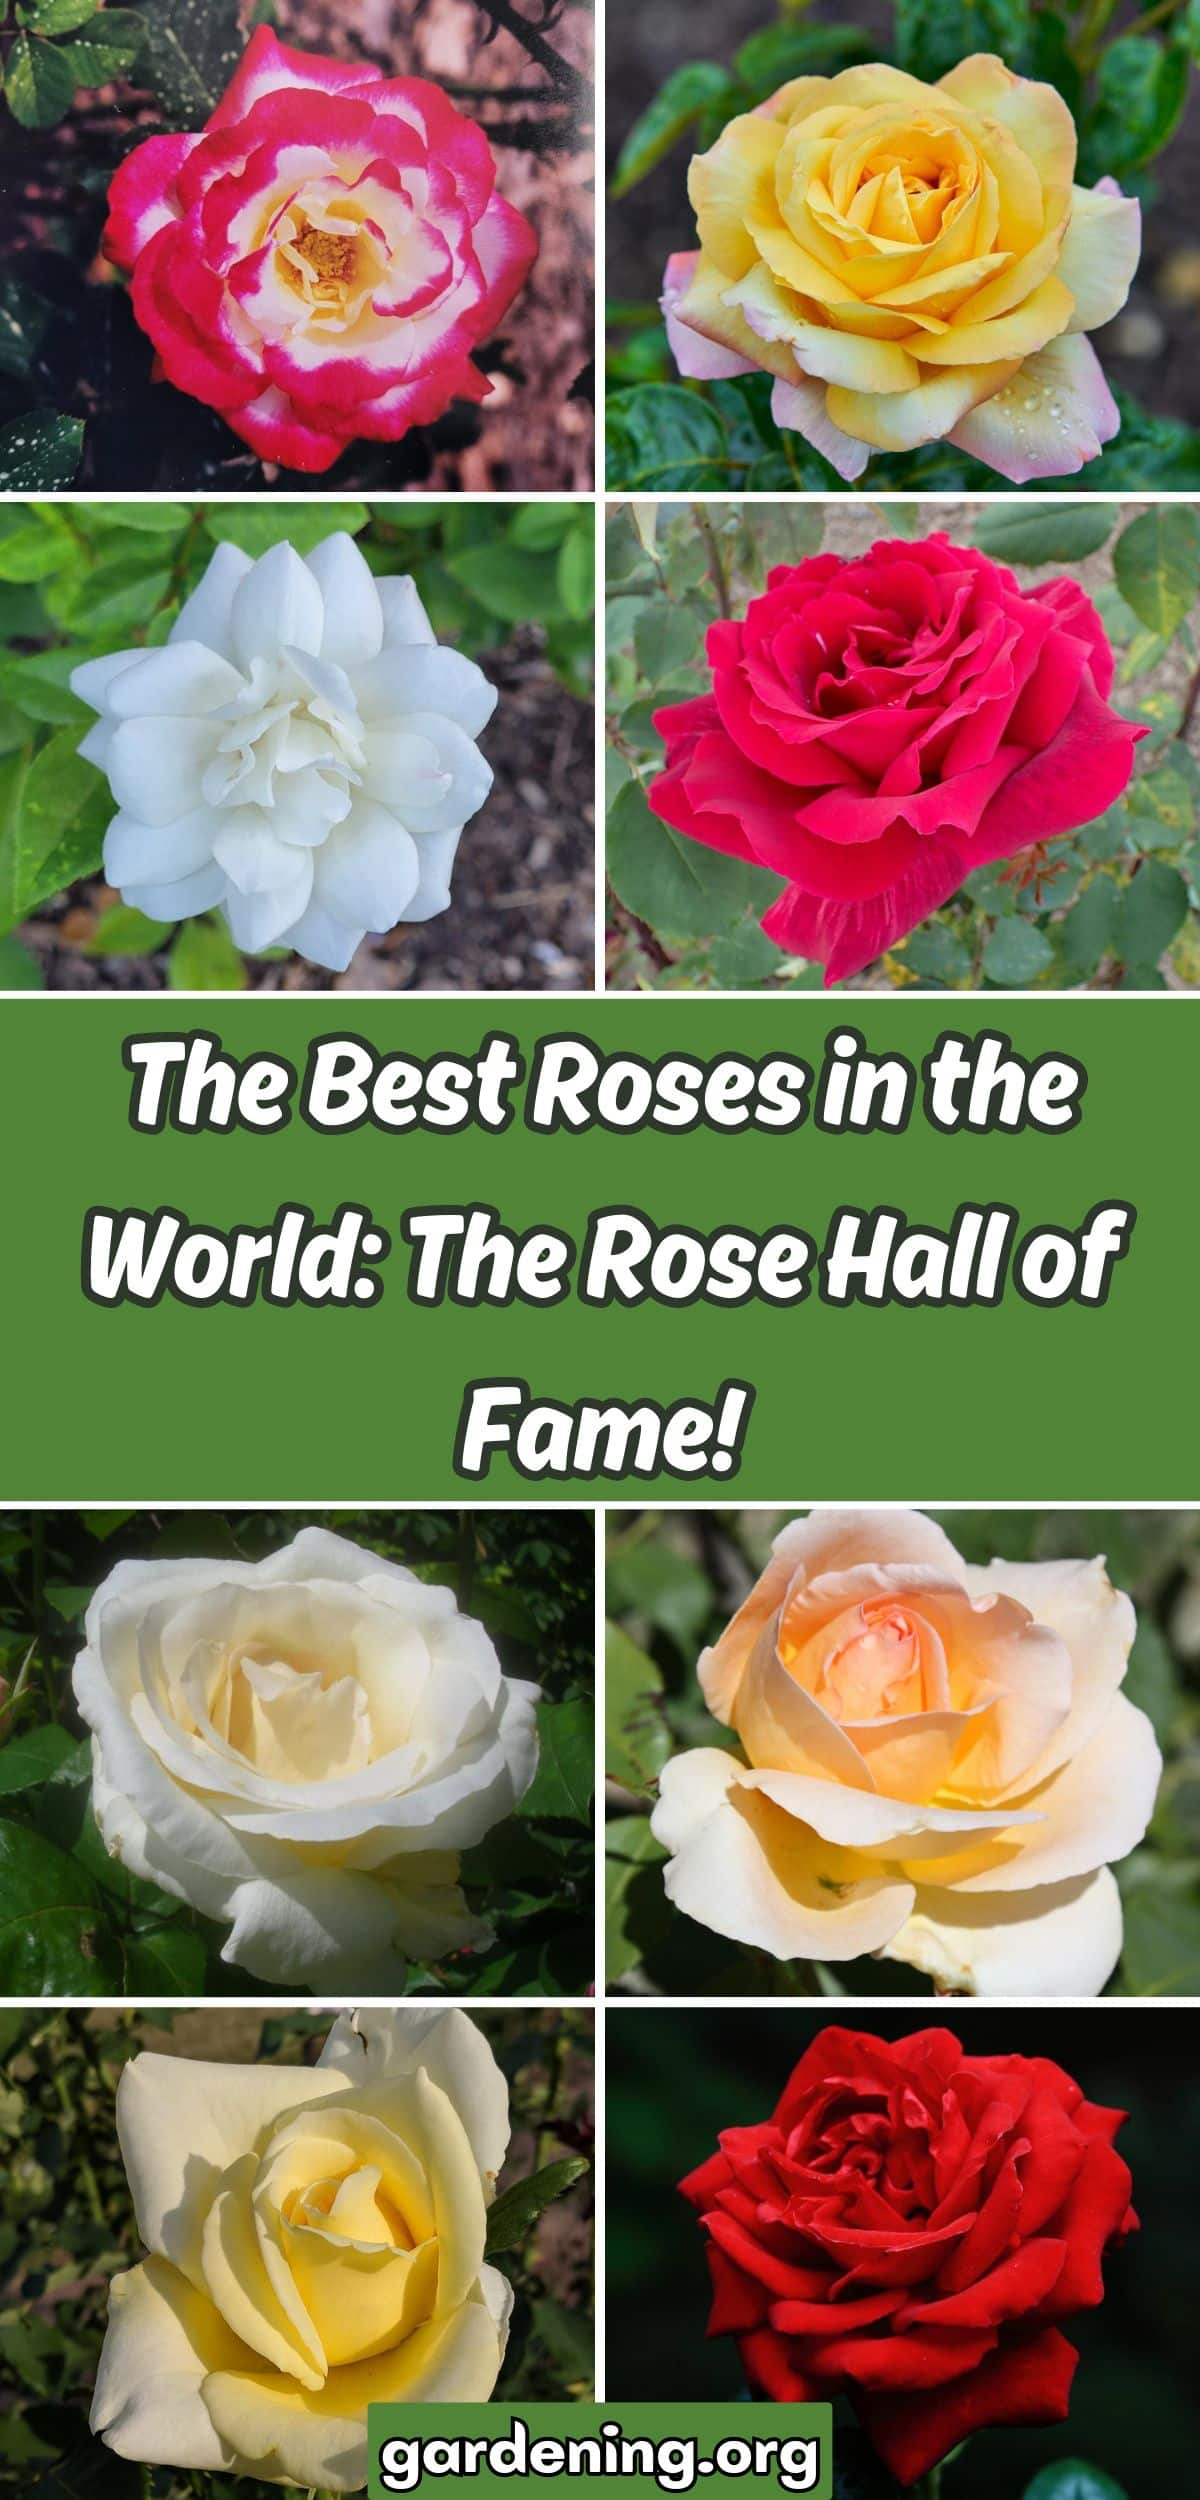 The Best Roses in the World: The Rose Hall of Fame! collage.